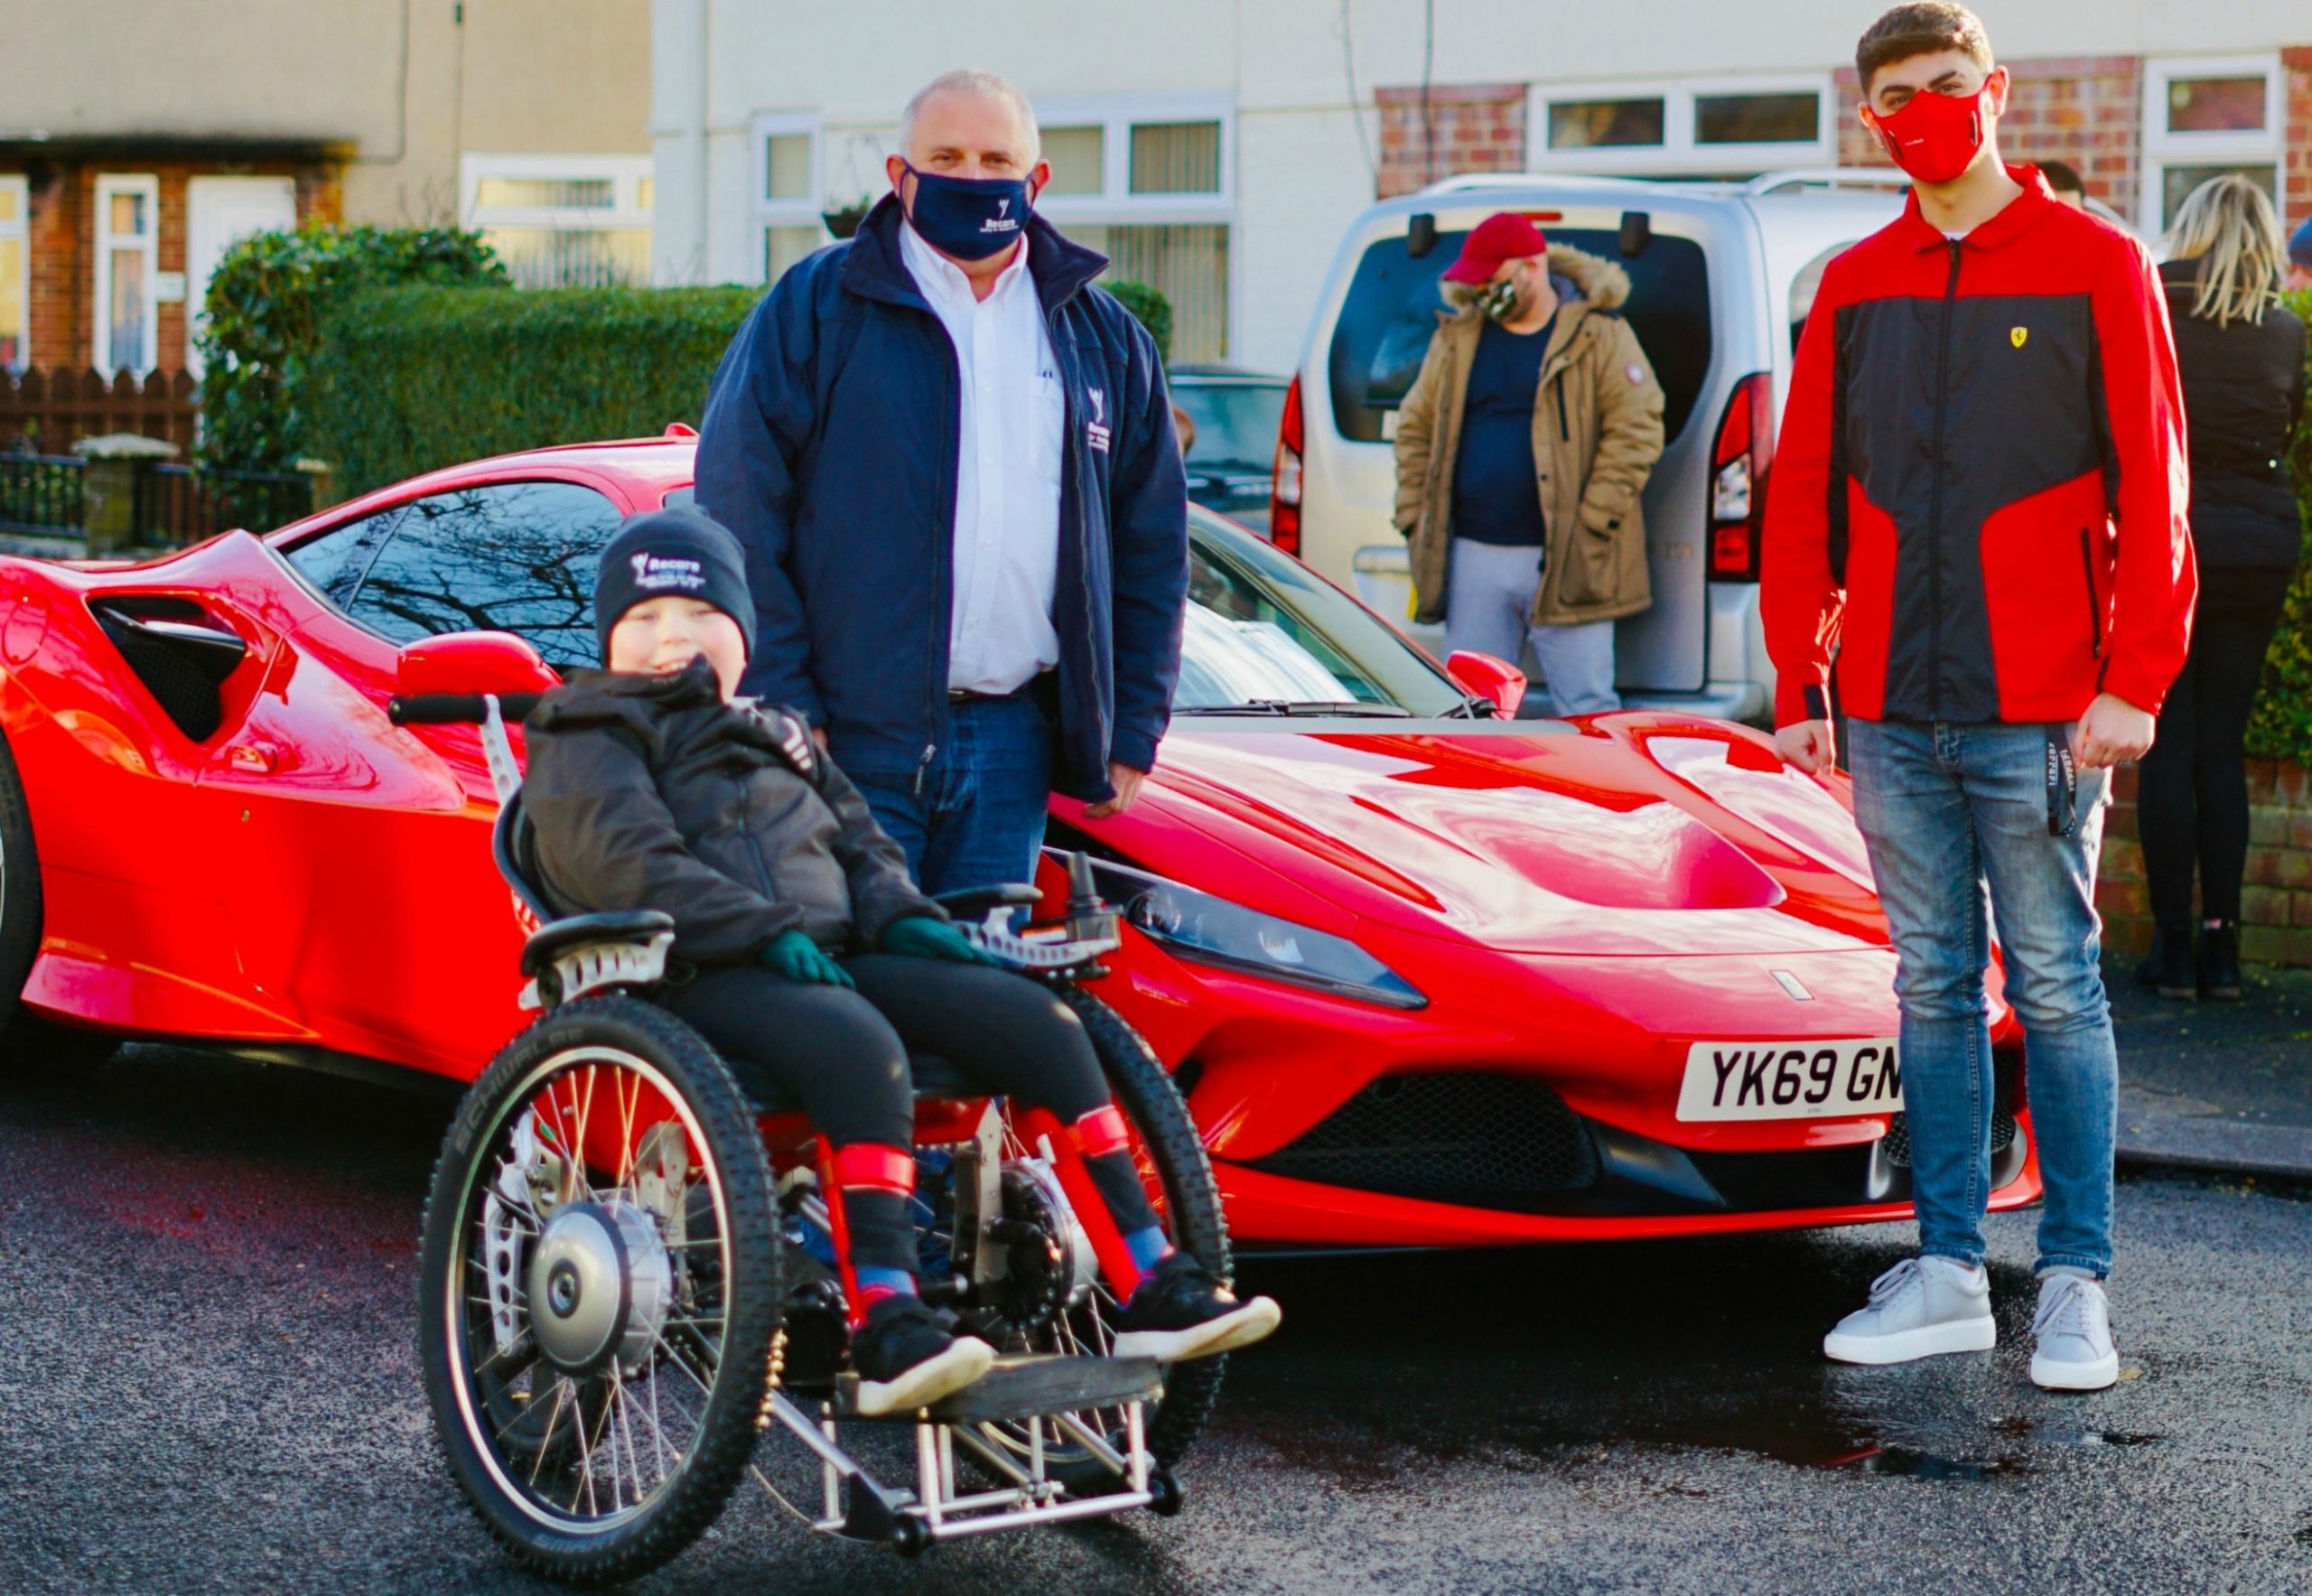 Recare and JCT600 Brooklands - Ferrari Delivers Life Changing F1-inspired Powered Wheelchair to Darlington’s Disabled Robbie